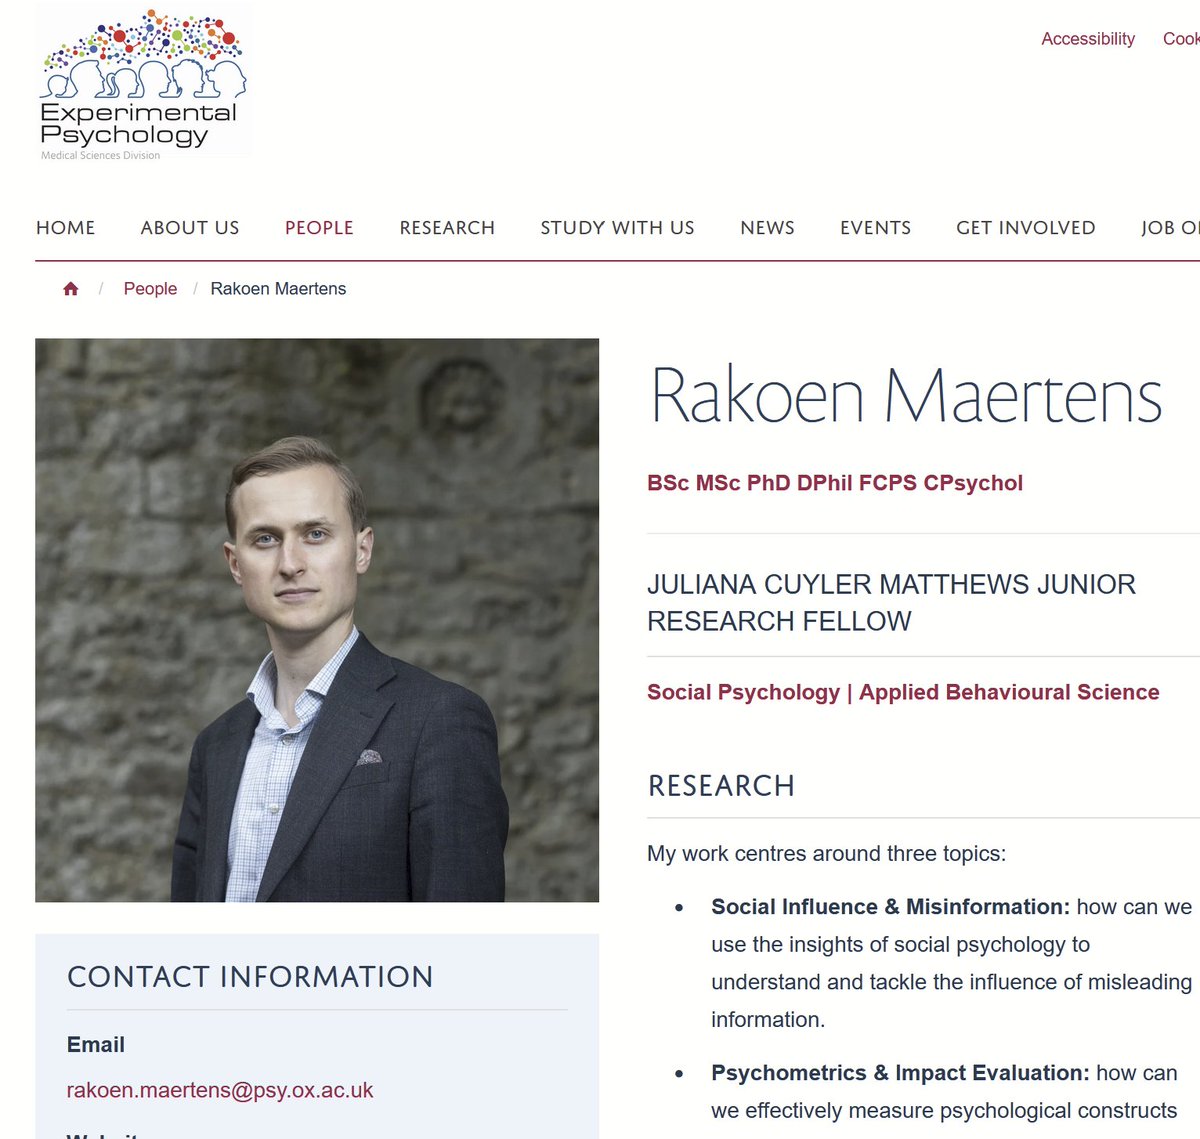 Many congratulations to Dr @RakoenMaertens who started this year as the Juliana Cuyler Matthews Research Fellow at @UniofOxford @NewCollegeOx where he'll be continuing his leading research on psychometrics, influence & misinformation! 👏 psy.ox.ac.uk/people/rakoen-…